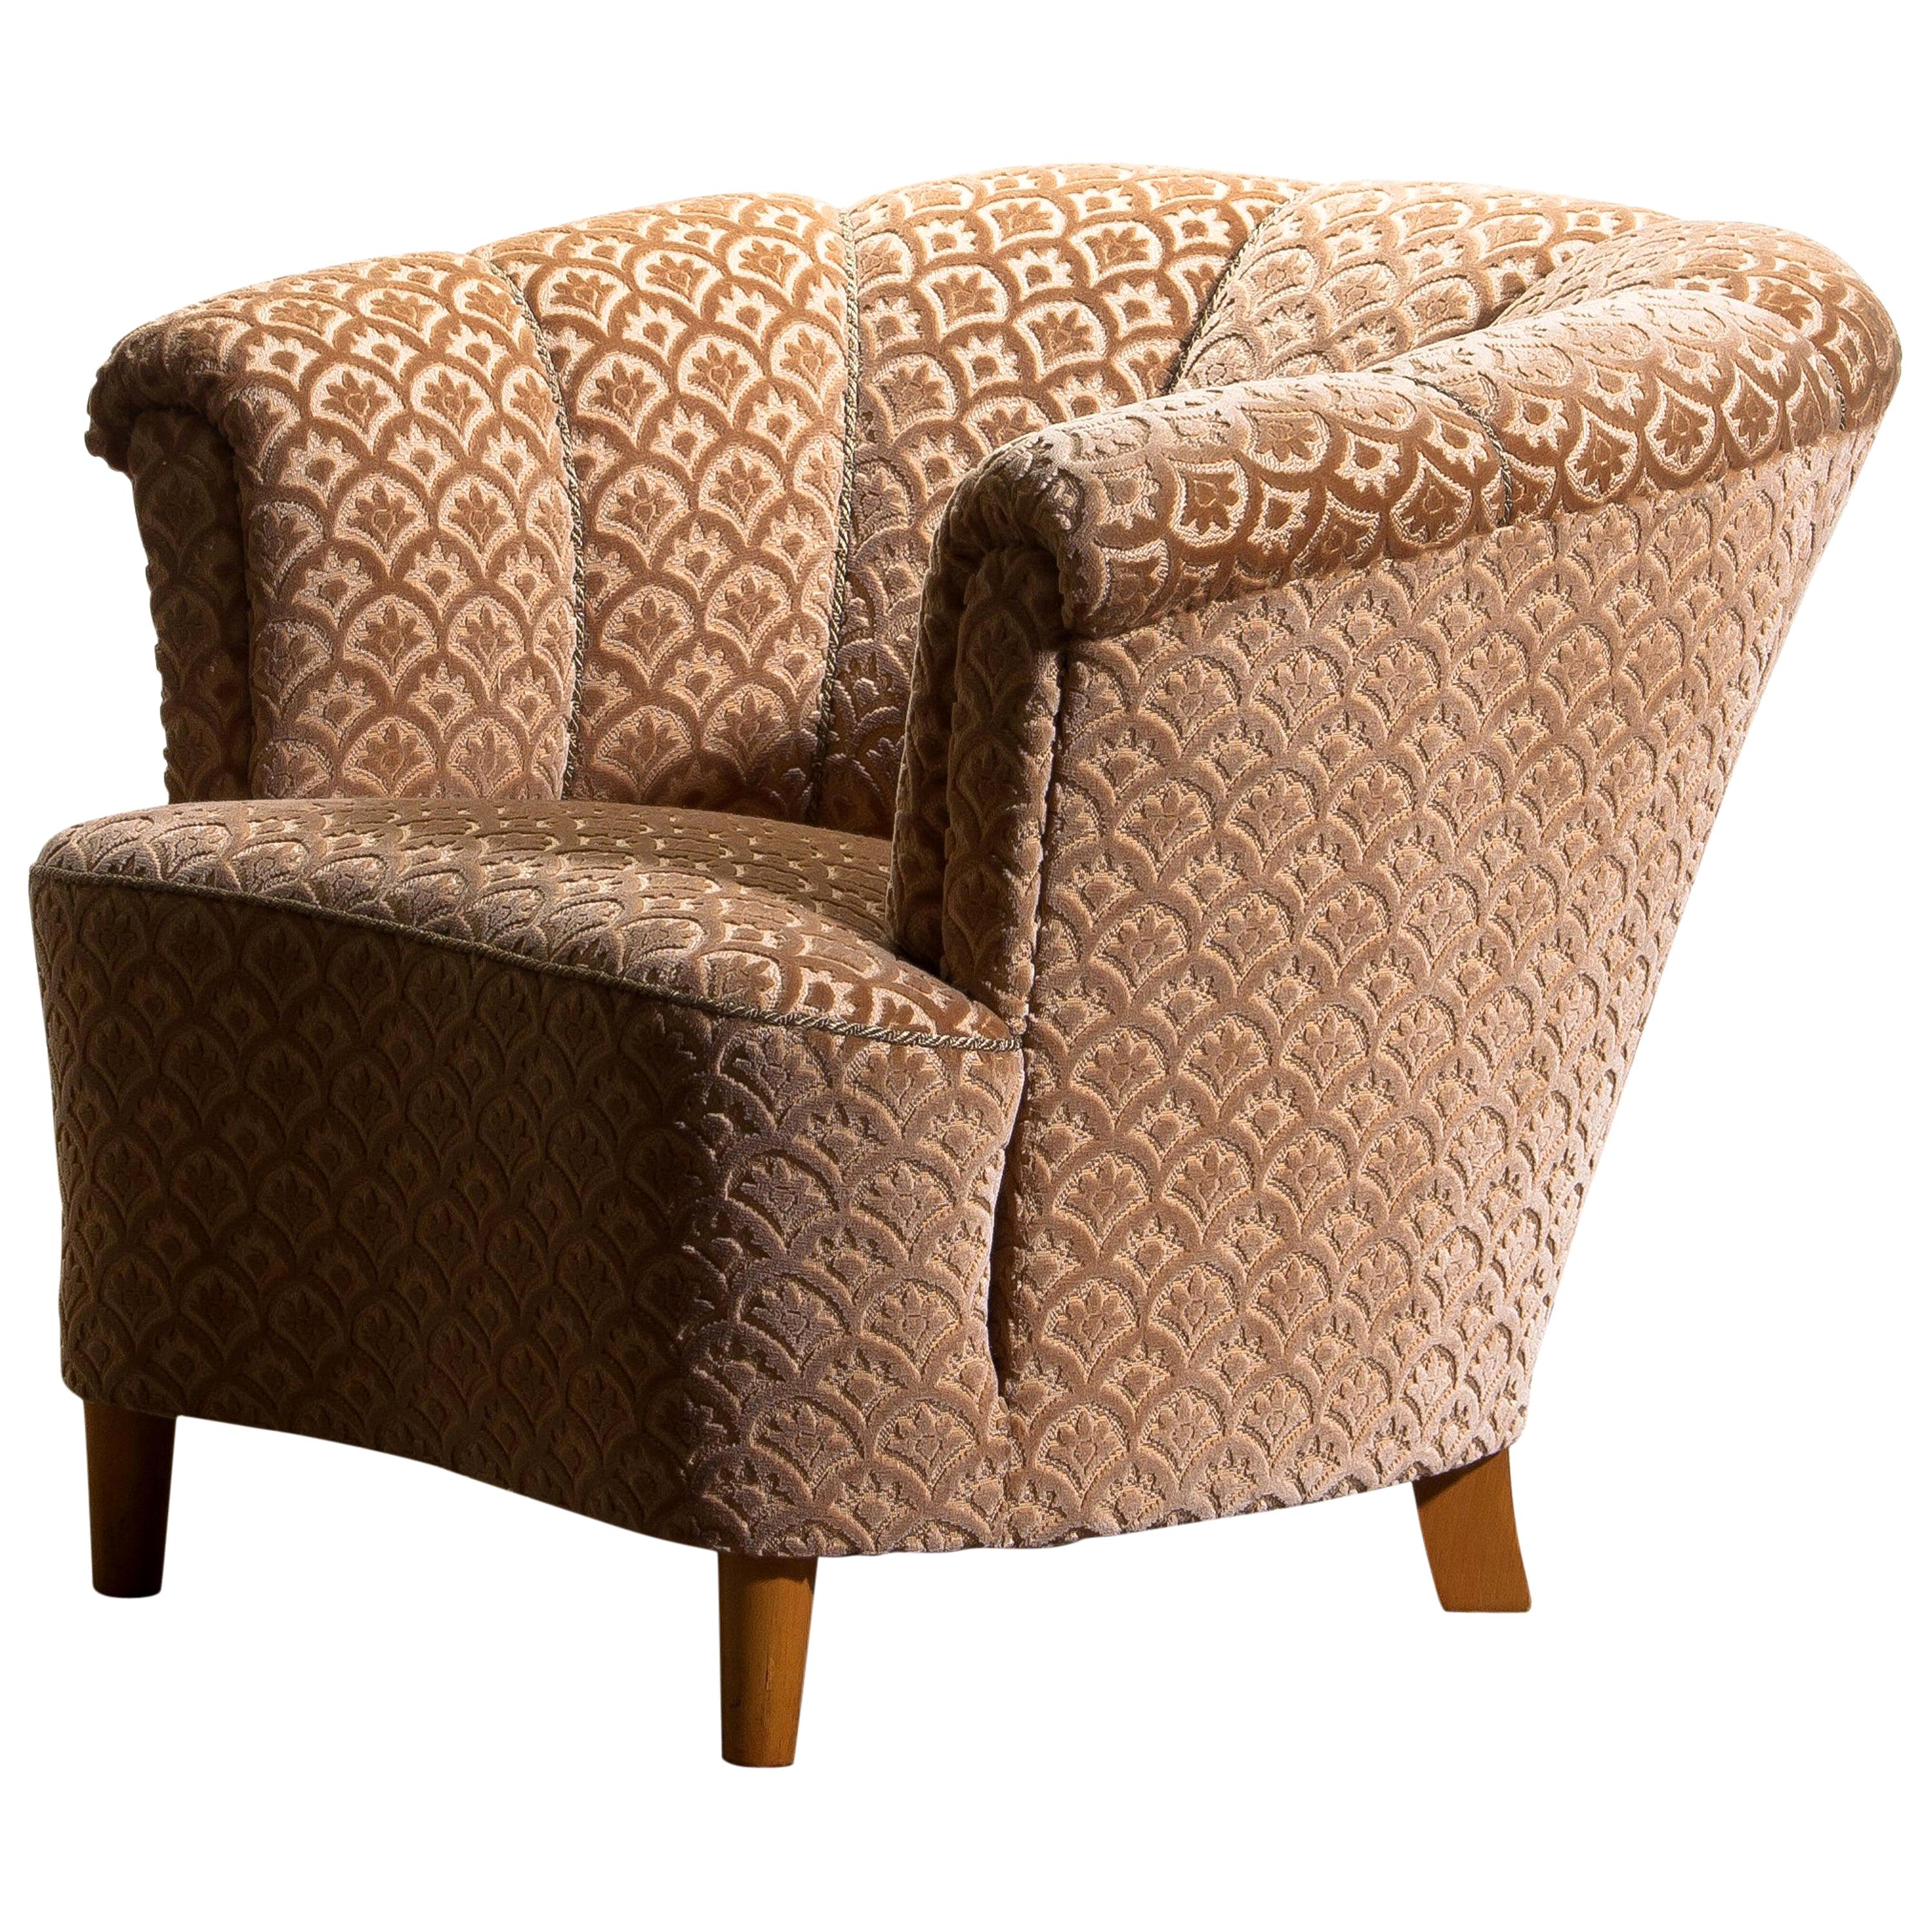 Mid-Century Modern 1940s, Velvet Jacquard Club Lounge Cocktail Chair from Sweden 1